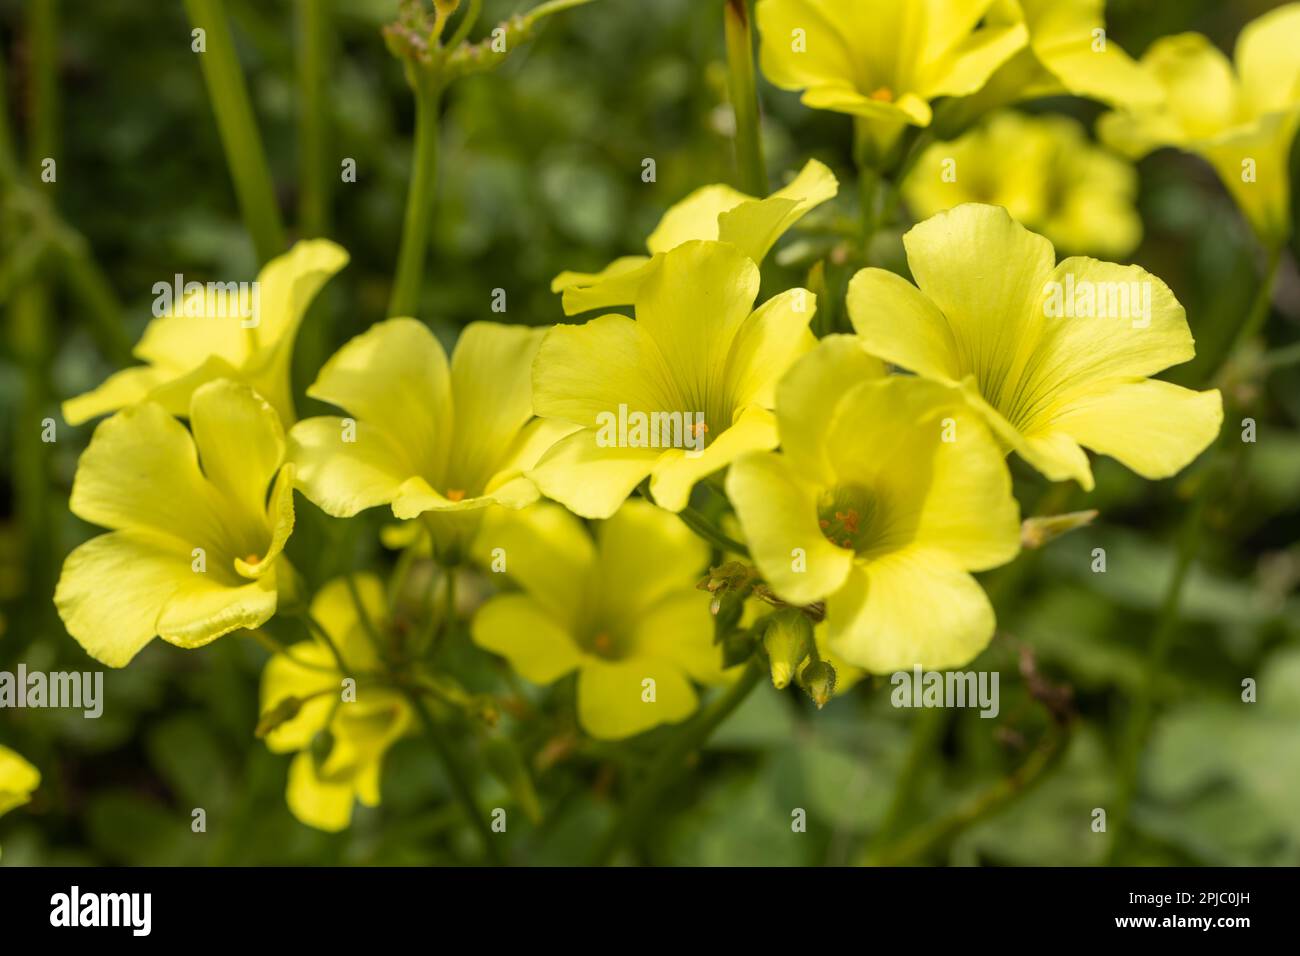 Flora of Israel. Oxalis pes-caprae is a species of tristylous yellow-flowering plant in the wood sorrel family Oxalidaceae. Oxalis cernua is a less co Stock Photo